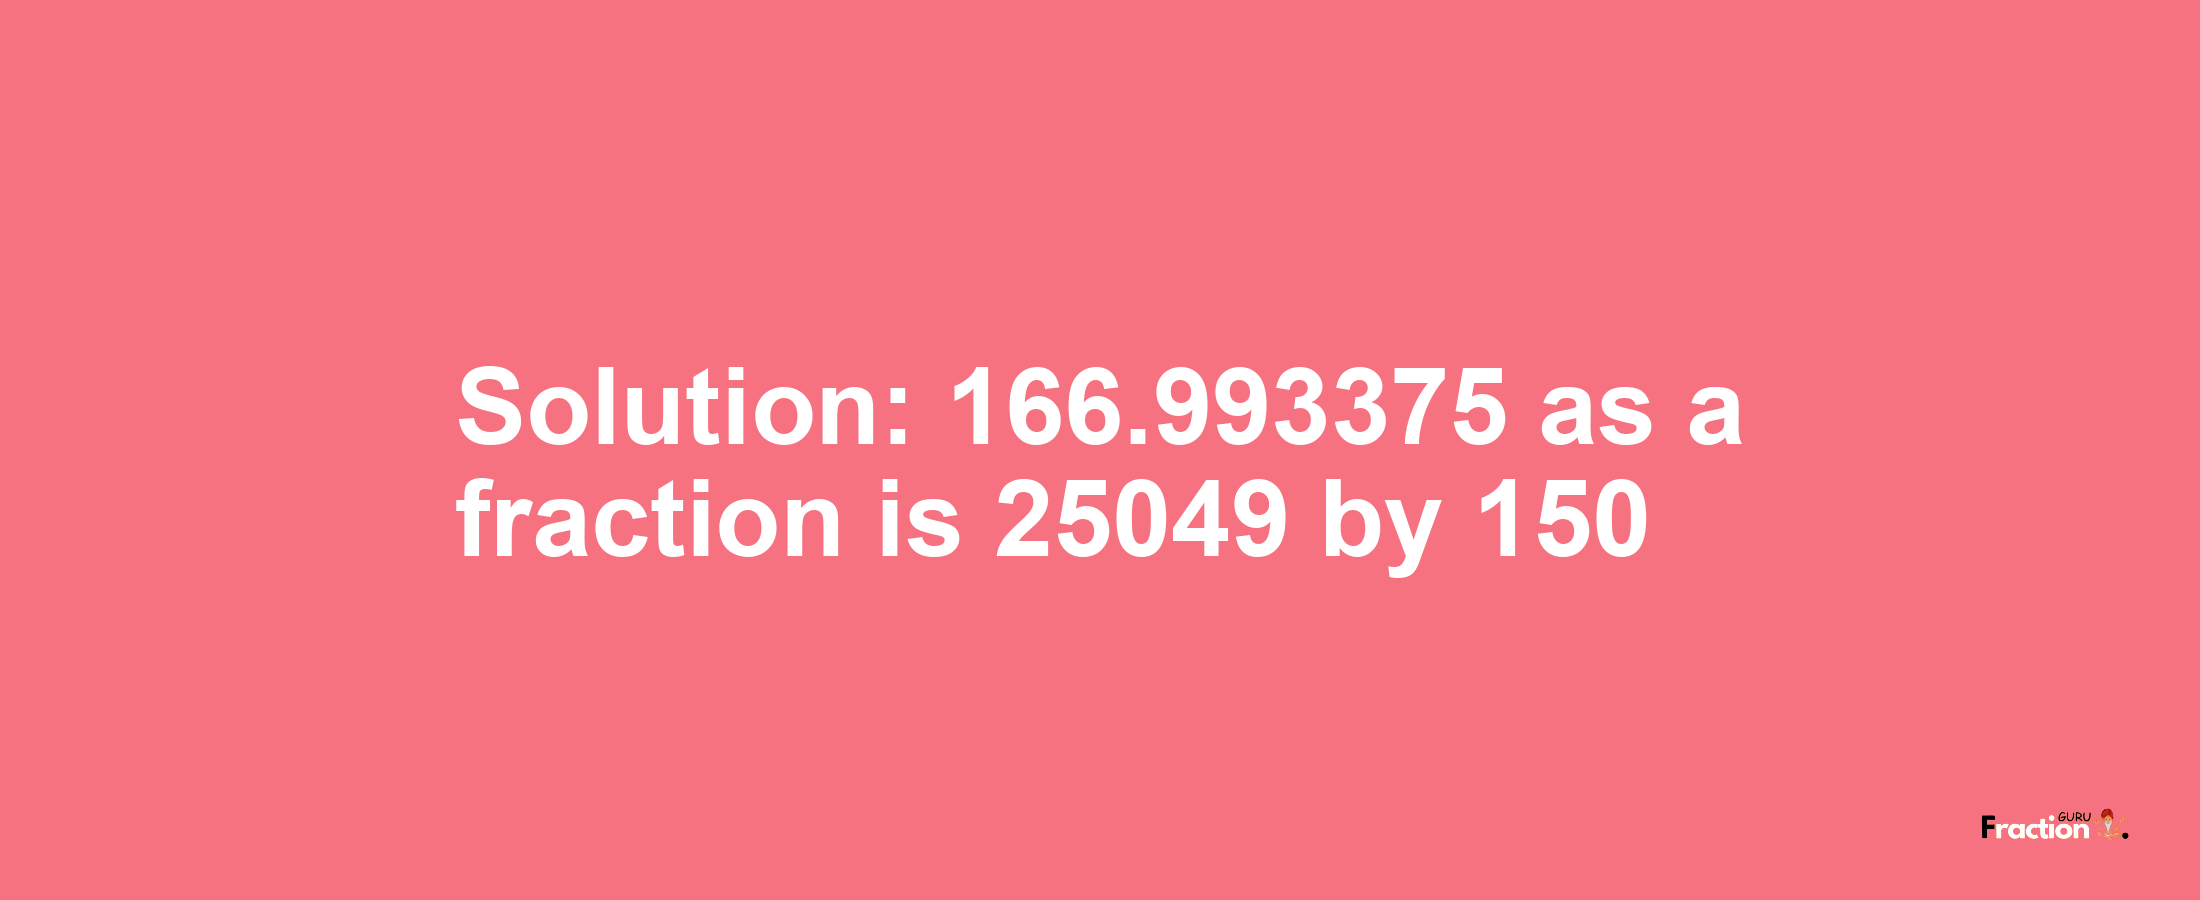 Solution:166.993375 as a fraction is 25049/150